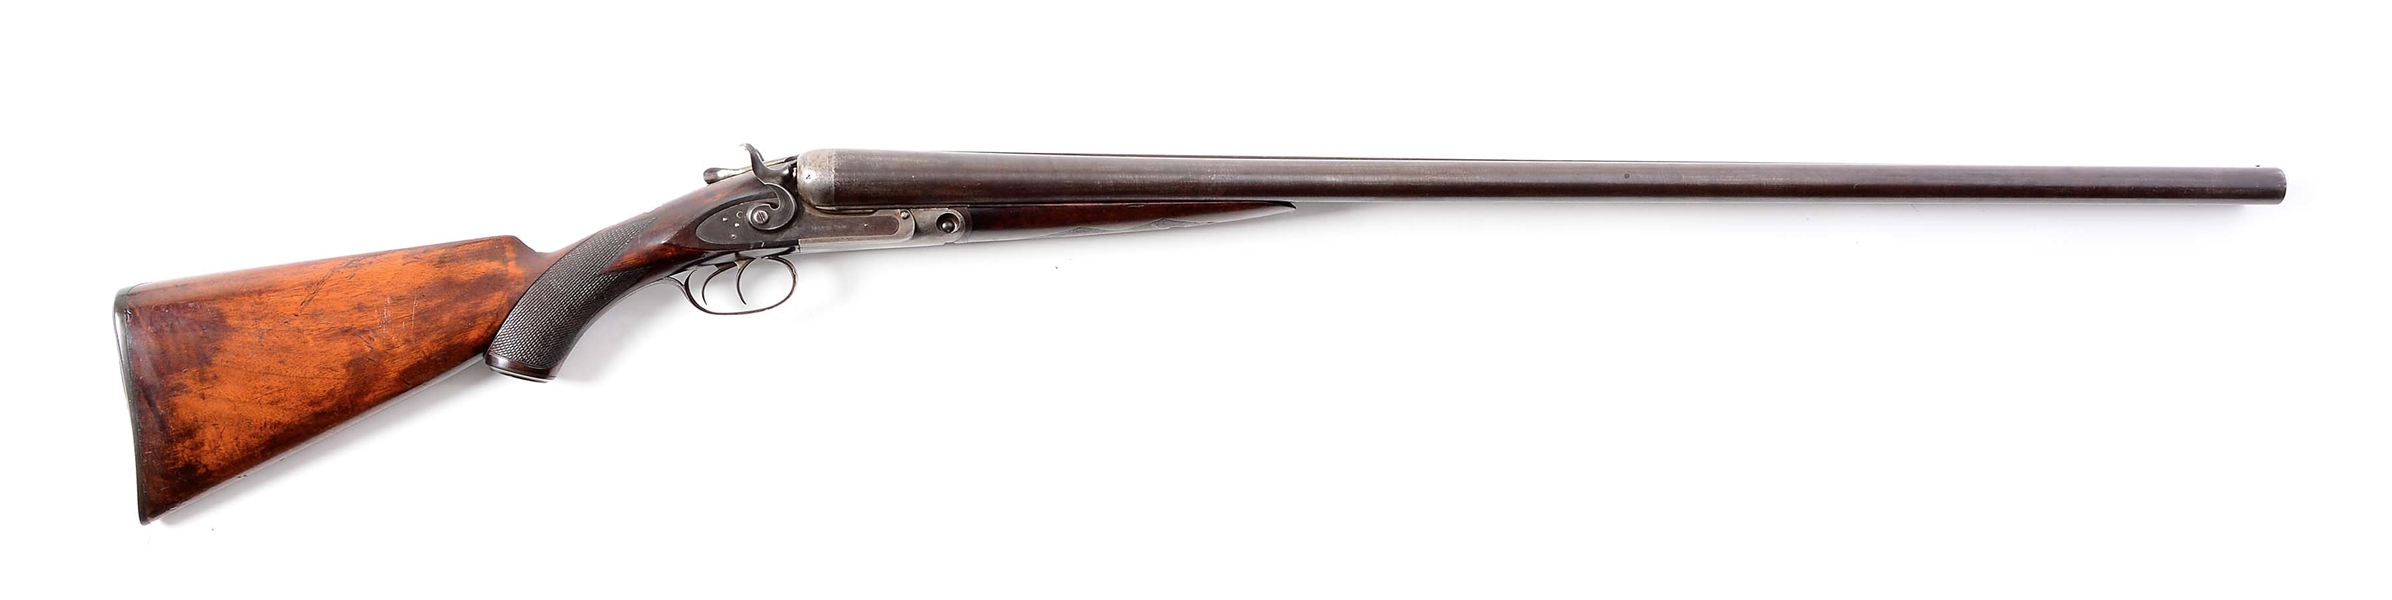 (A) EXTRA LARGE (7 FRAME) PARKER 8 BORE TOP LEVER HAMMER GRADE I WATER FOWLING GUN (1887).